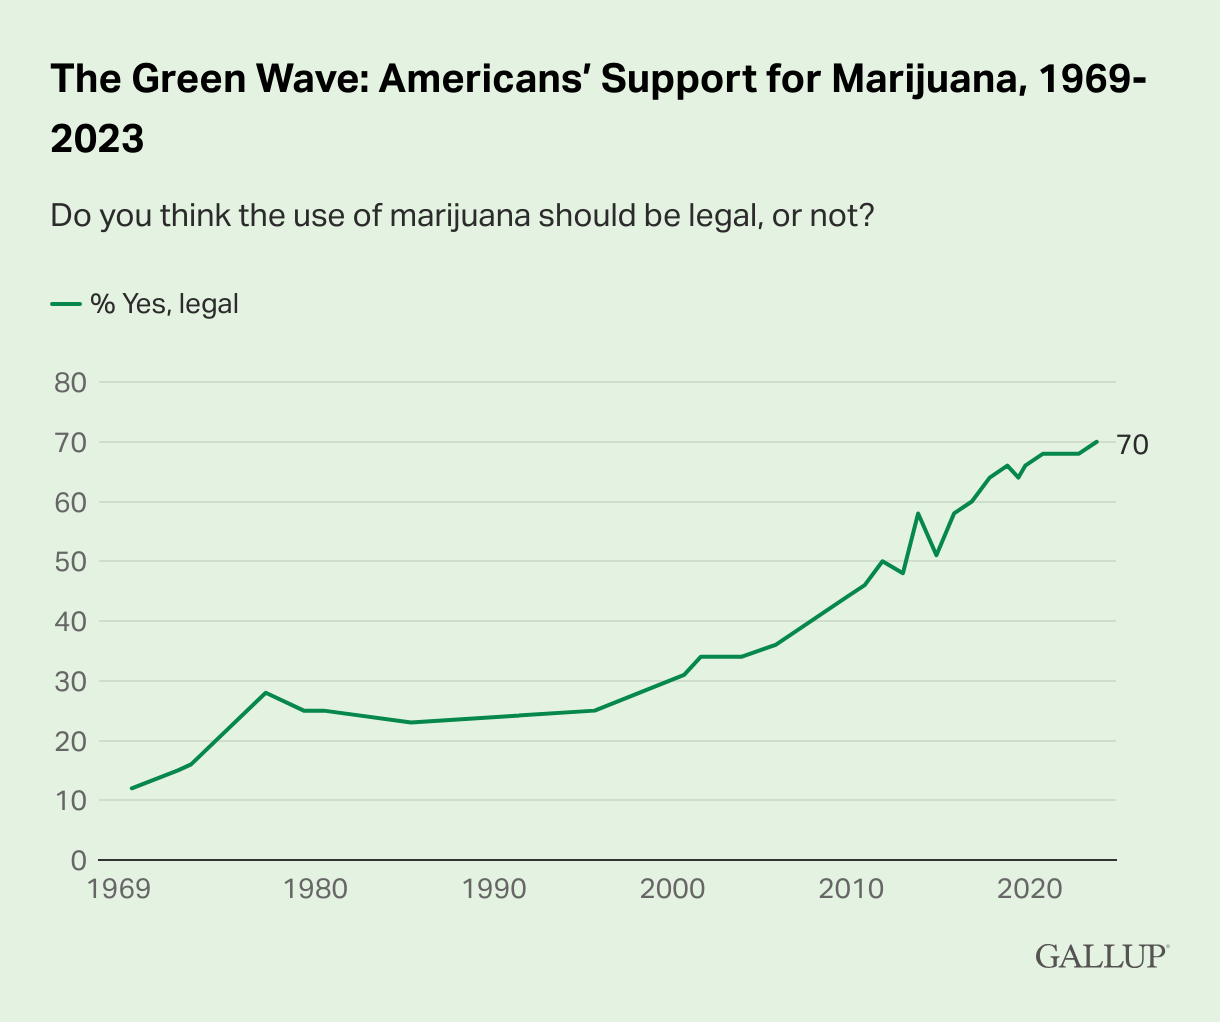 American support for legal cannabis